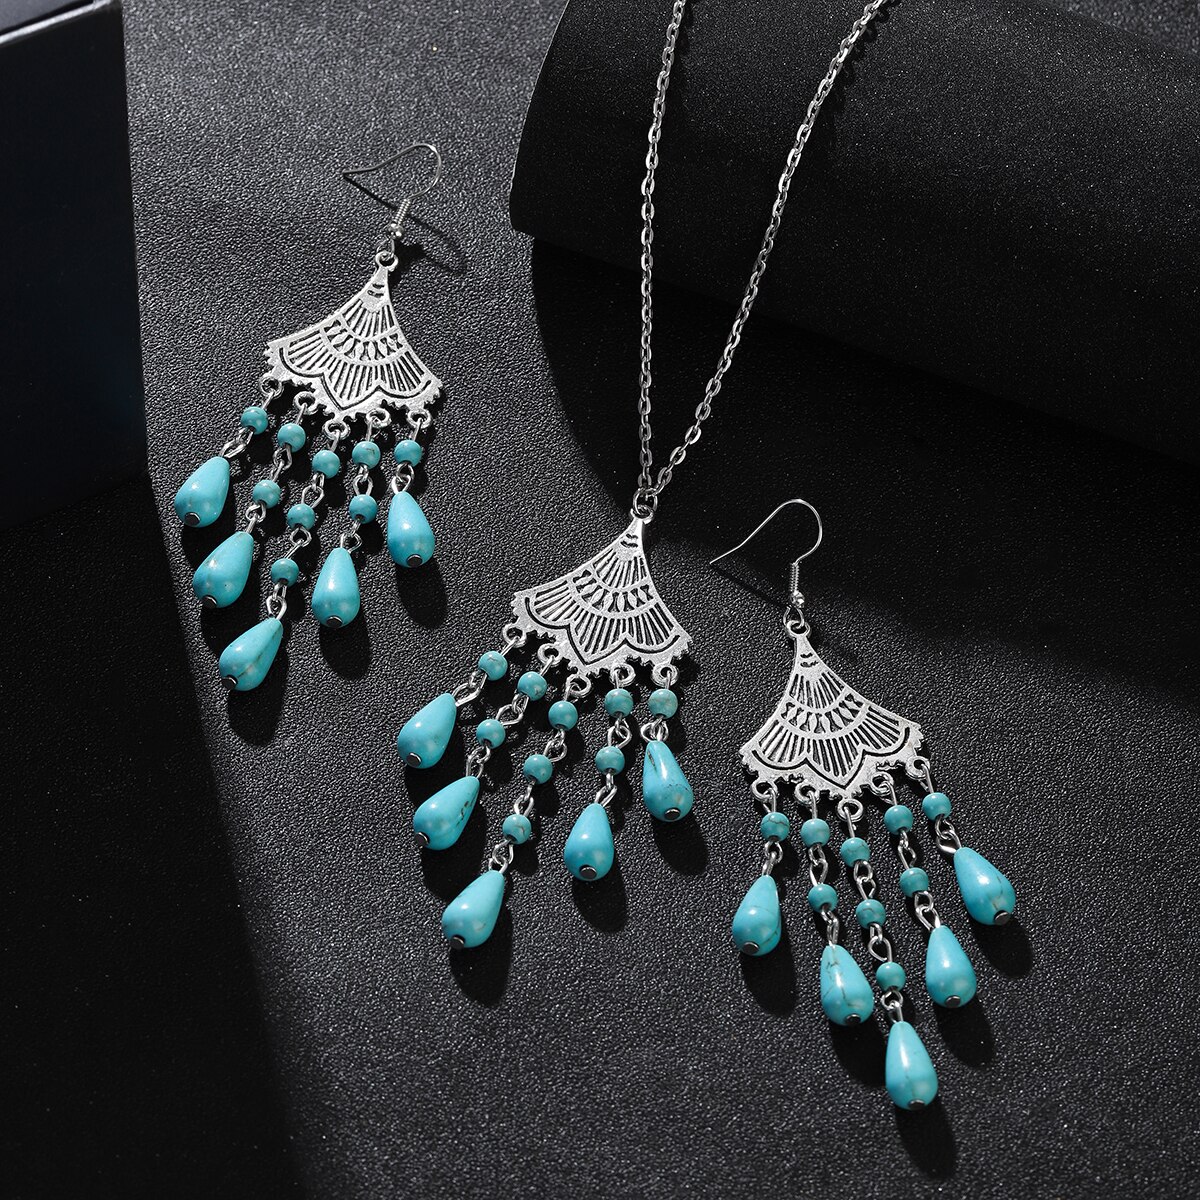 Ethnic-Boho-Blue-Stone-Tassel-Jewelry-Set-Charm-Ladies-Vintage-Jewelry-Silver-Color-Hollow-Flower-Ch-1005005134002231-6